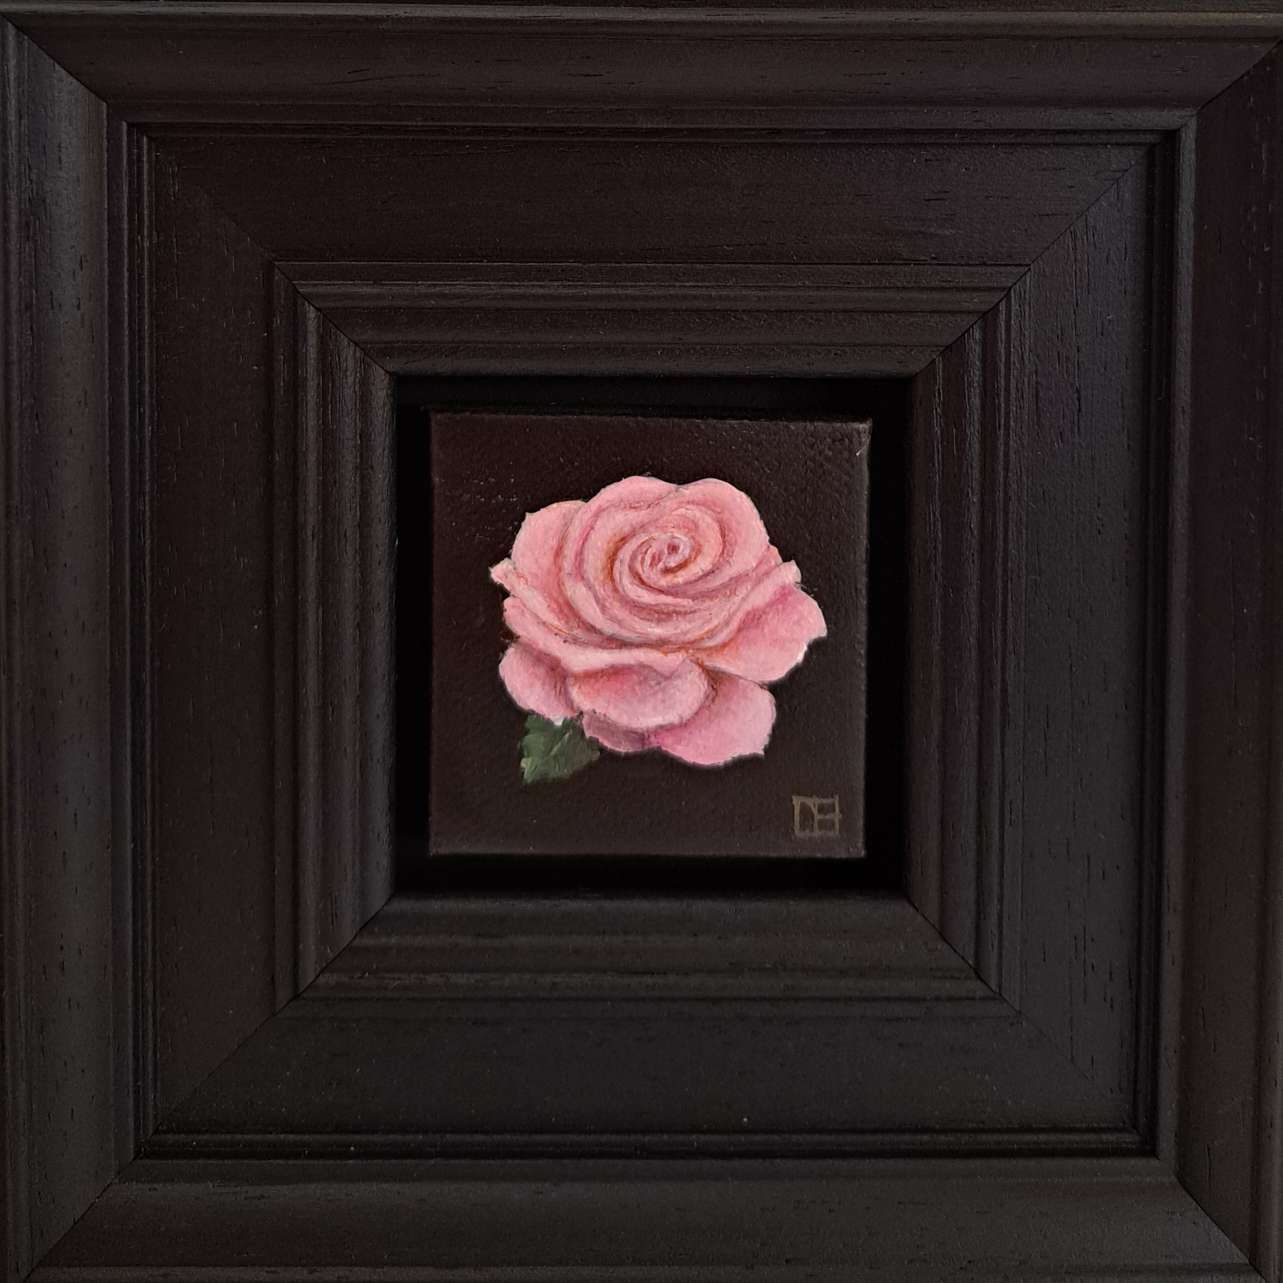 Pocket Pink Rose with Leaf 2 by Dani Humberstone